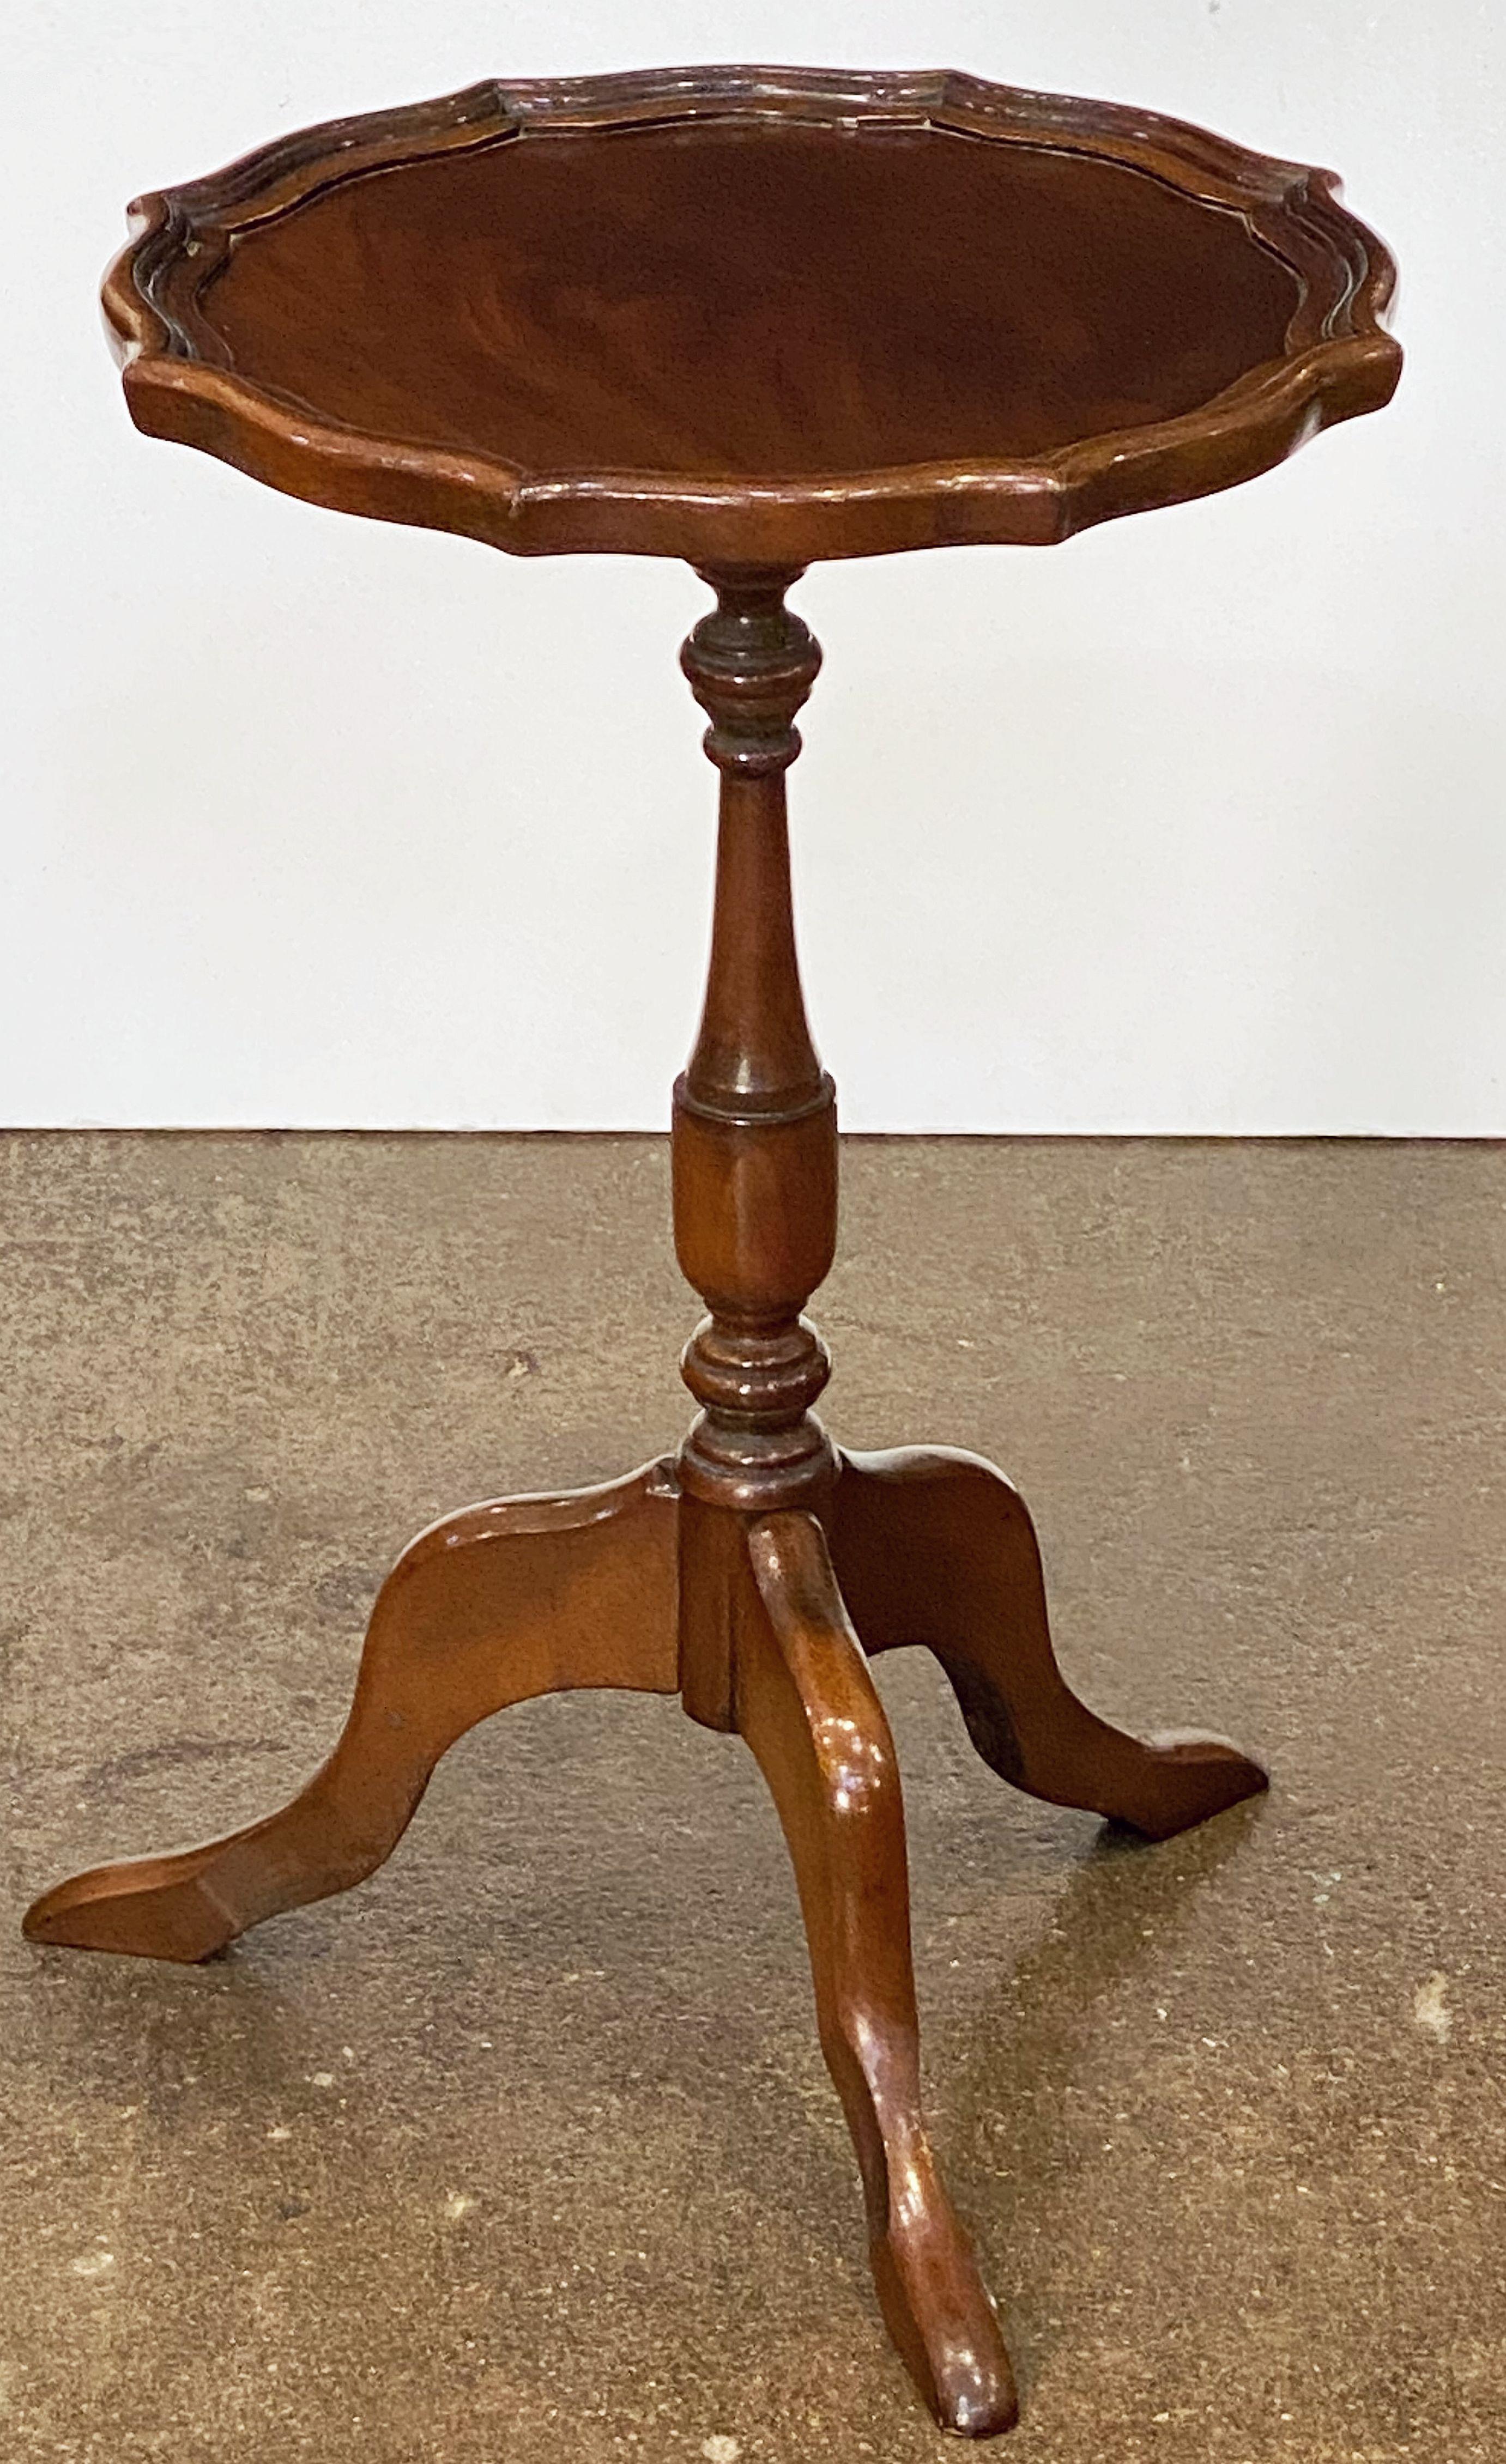 An English wine table of mahogany, featuring a raised edge around the circumference of the scalloped, moulded top, mounted upon a turned column pedestal with tripod base.

An excellent choice as a side table or for serving.